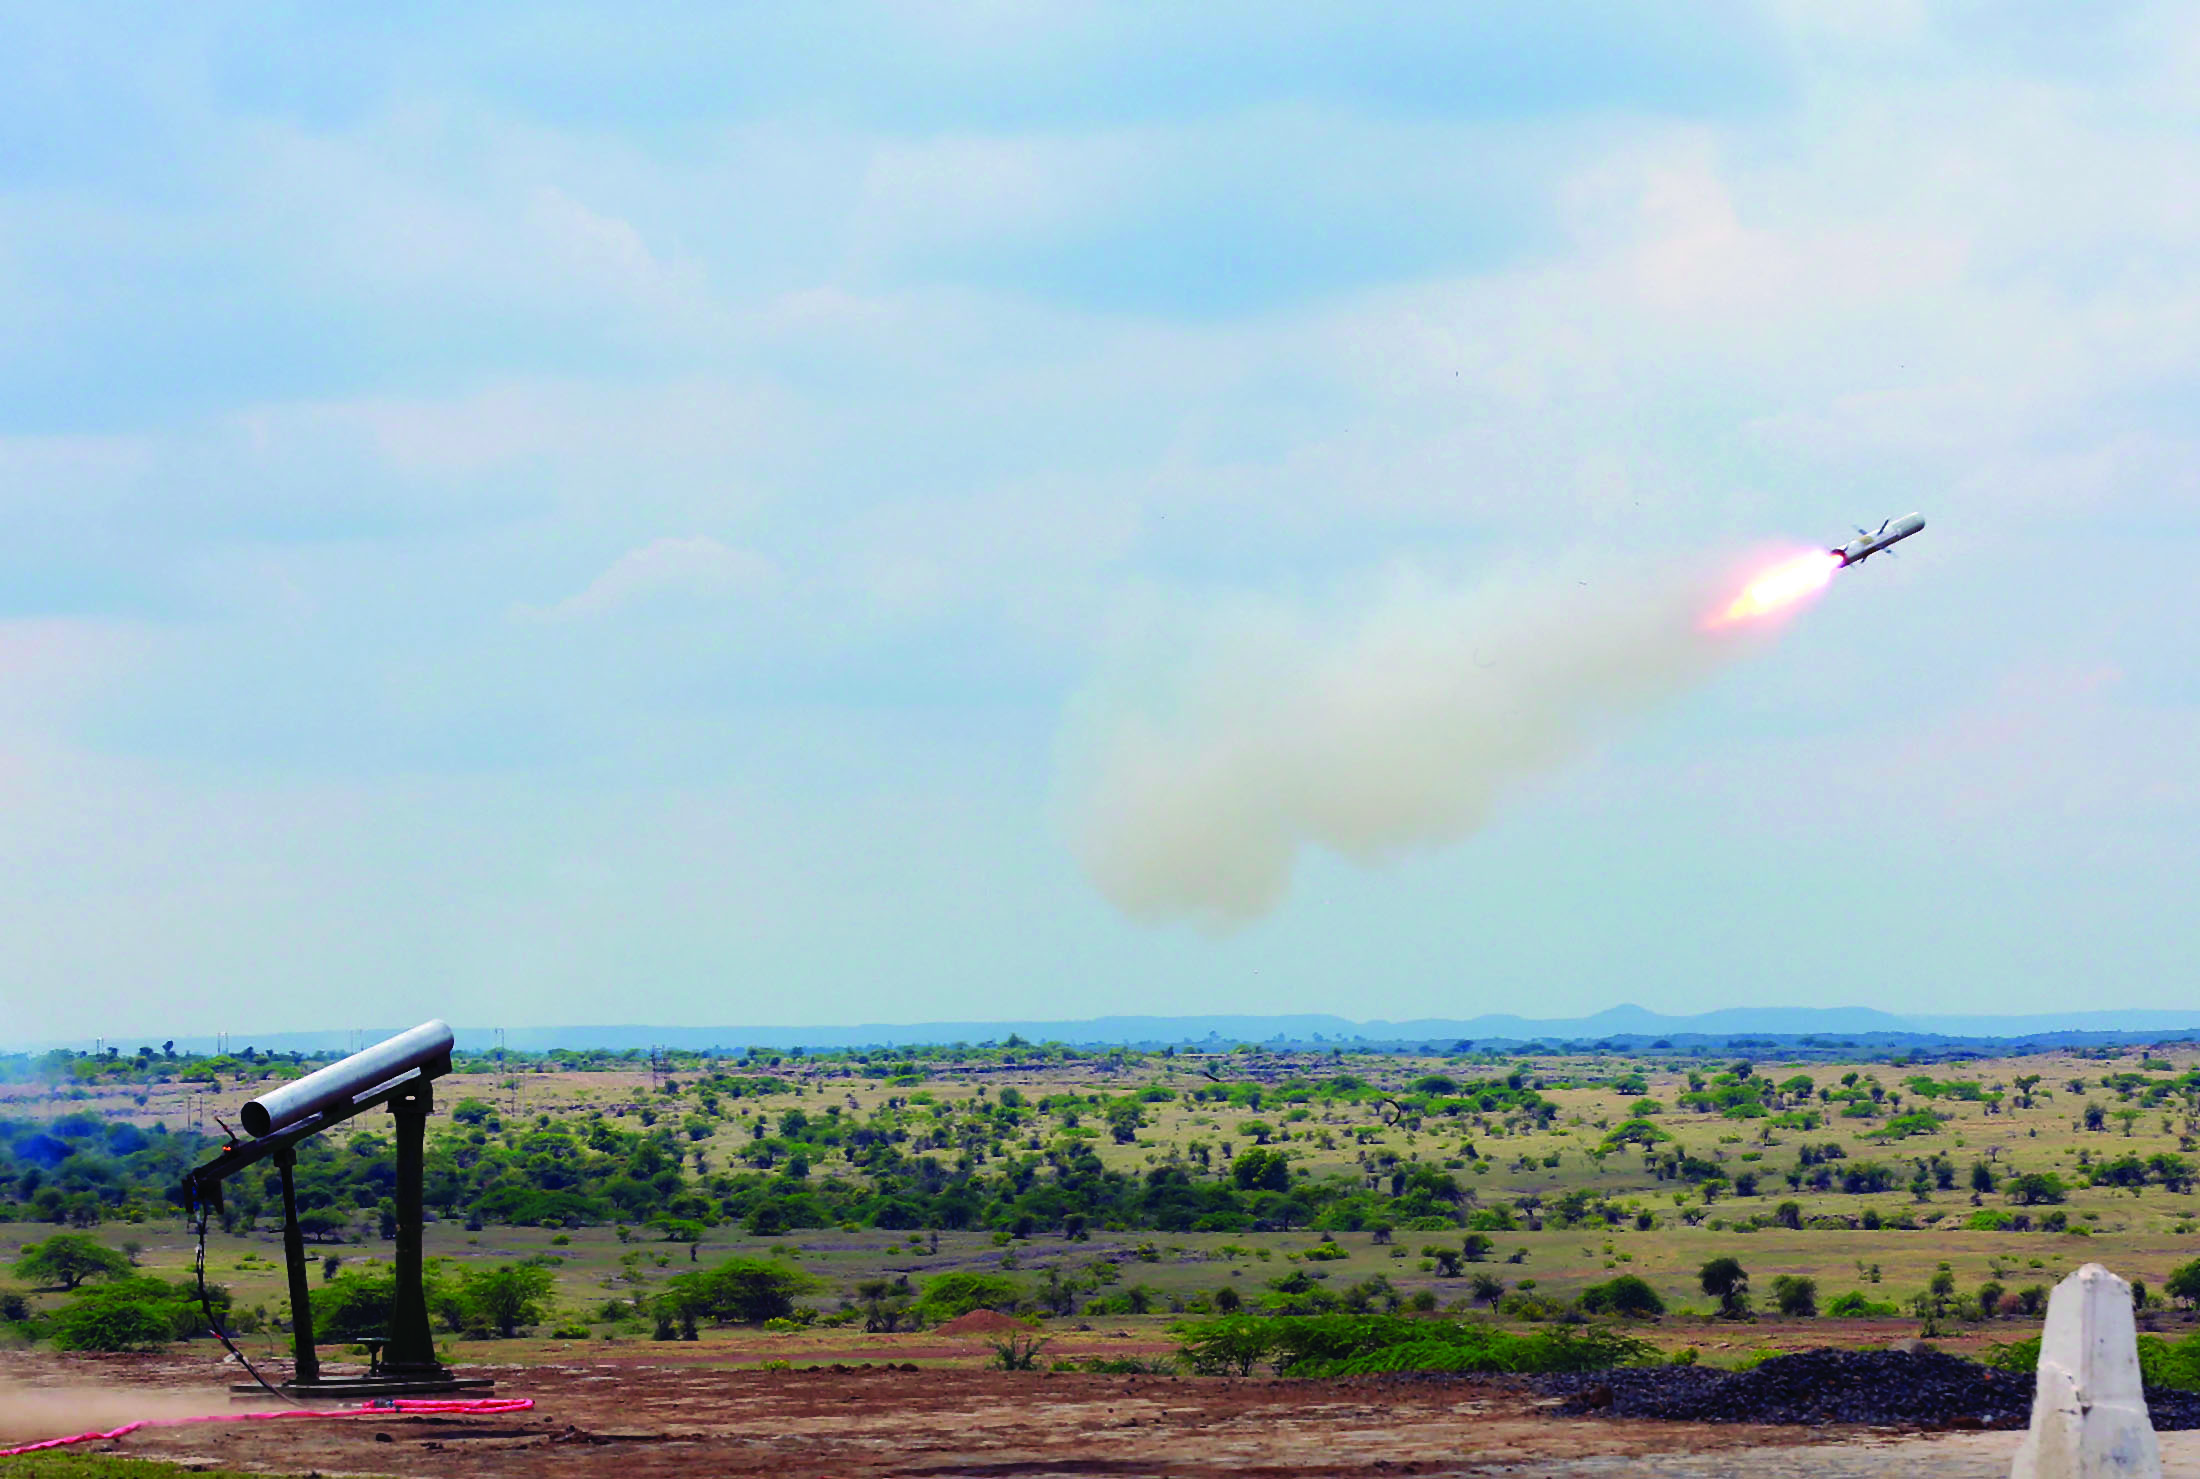 Indigenous Man Portable Anti-Tank Guided Missile tested Successfully